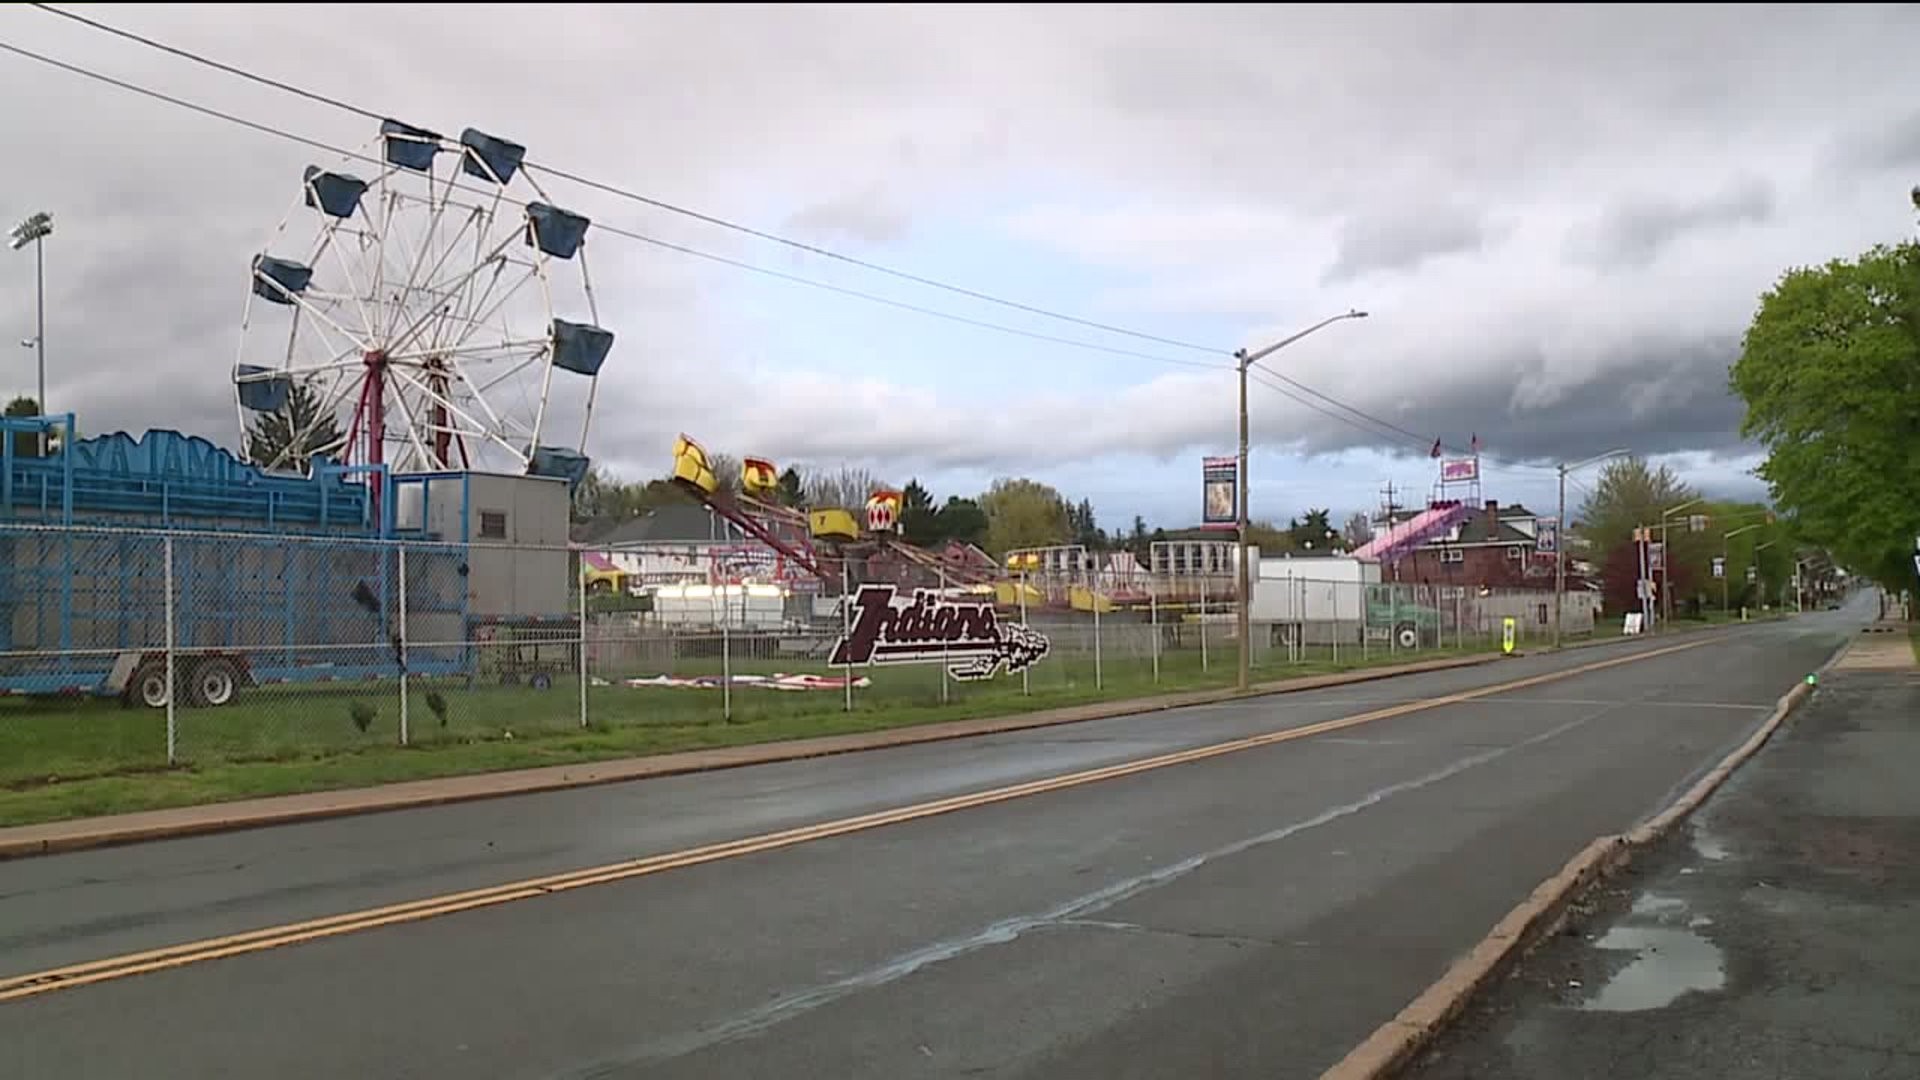 Wet Weather Cancels Carnival, but Show Goes on at Drive-in Theater